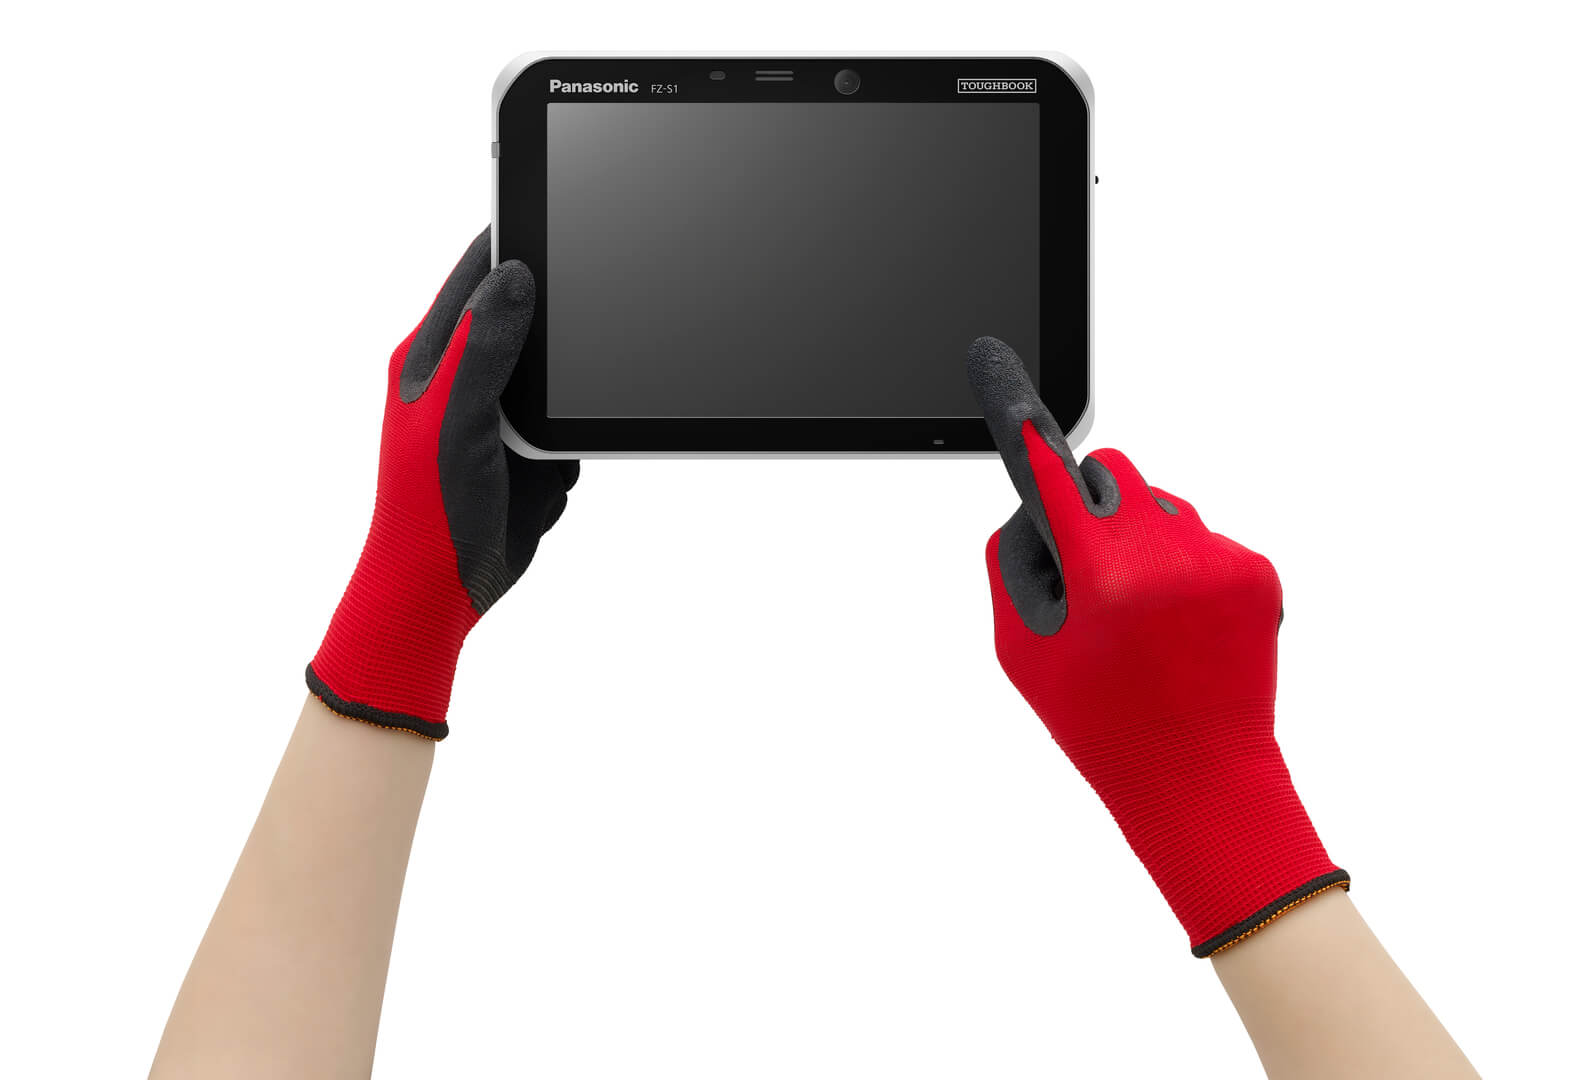 Toughpad FZ-S1 with gloved hands